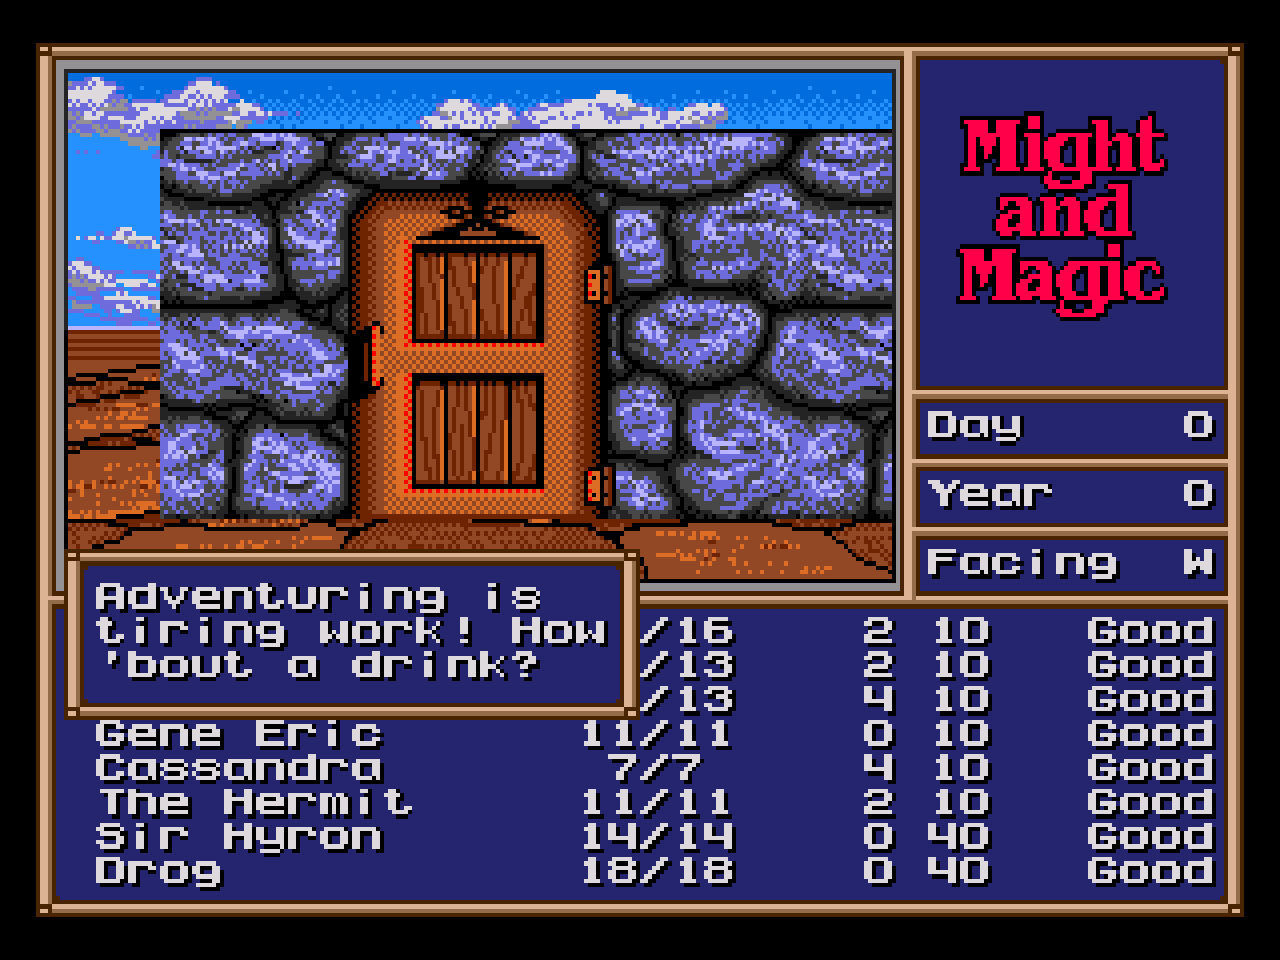 Likewise, Might and Magic Ii was interesting, but again too grindy for me.